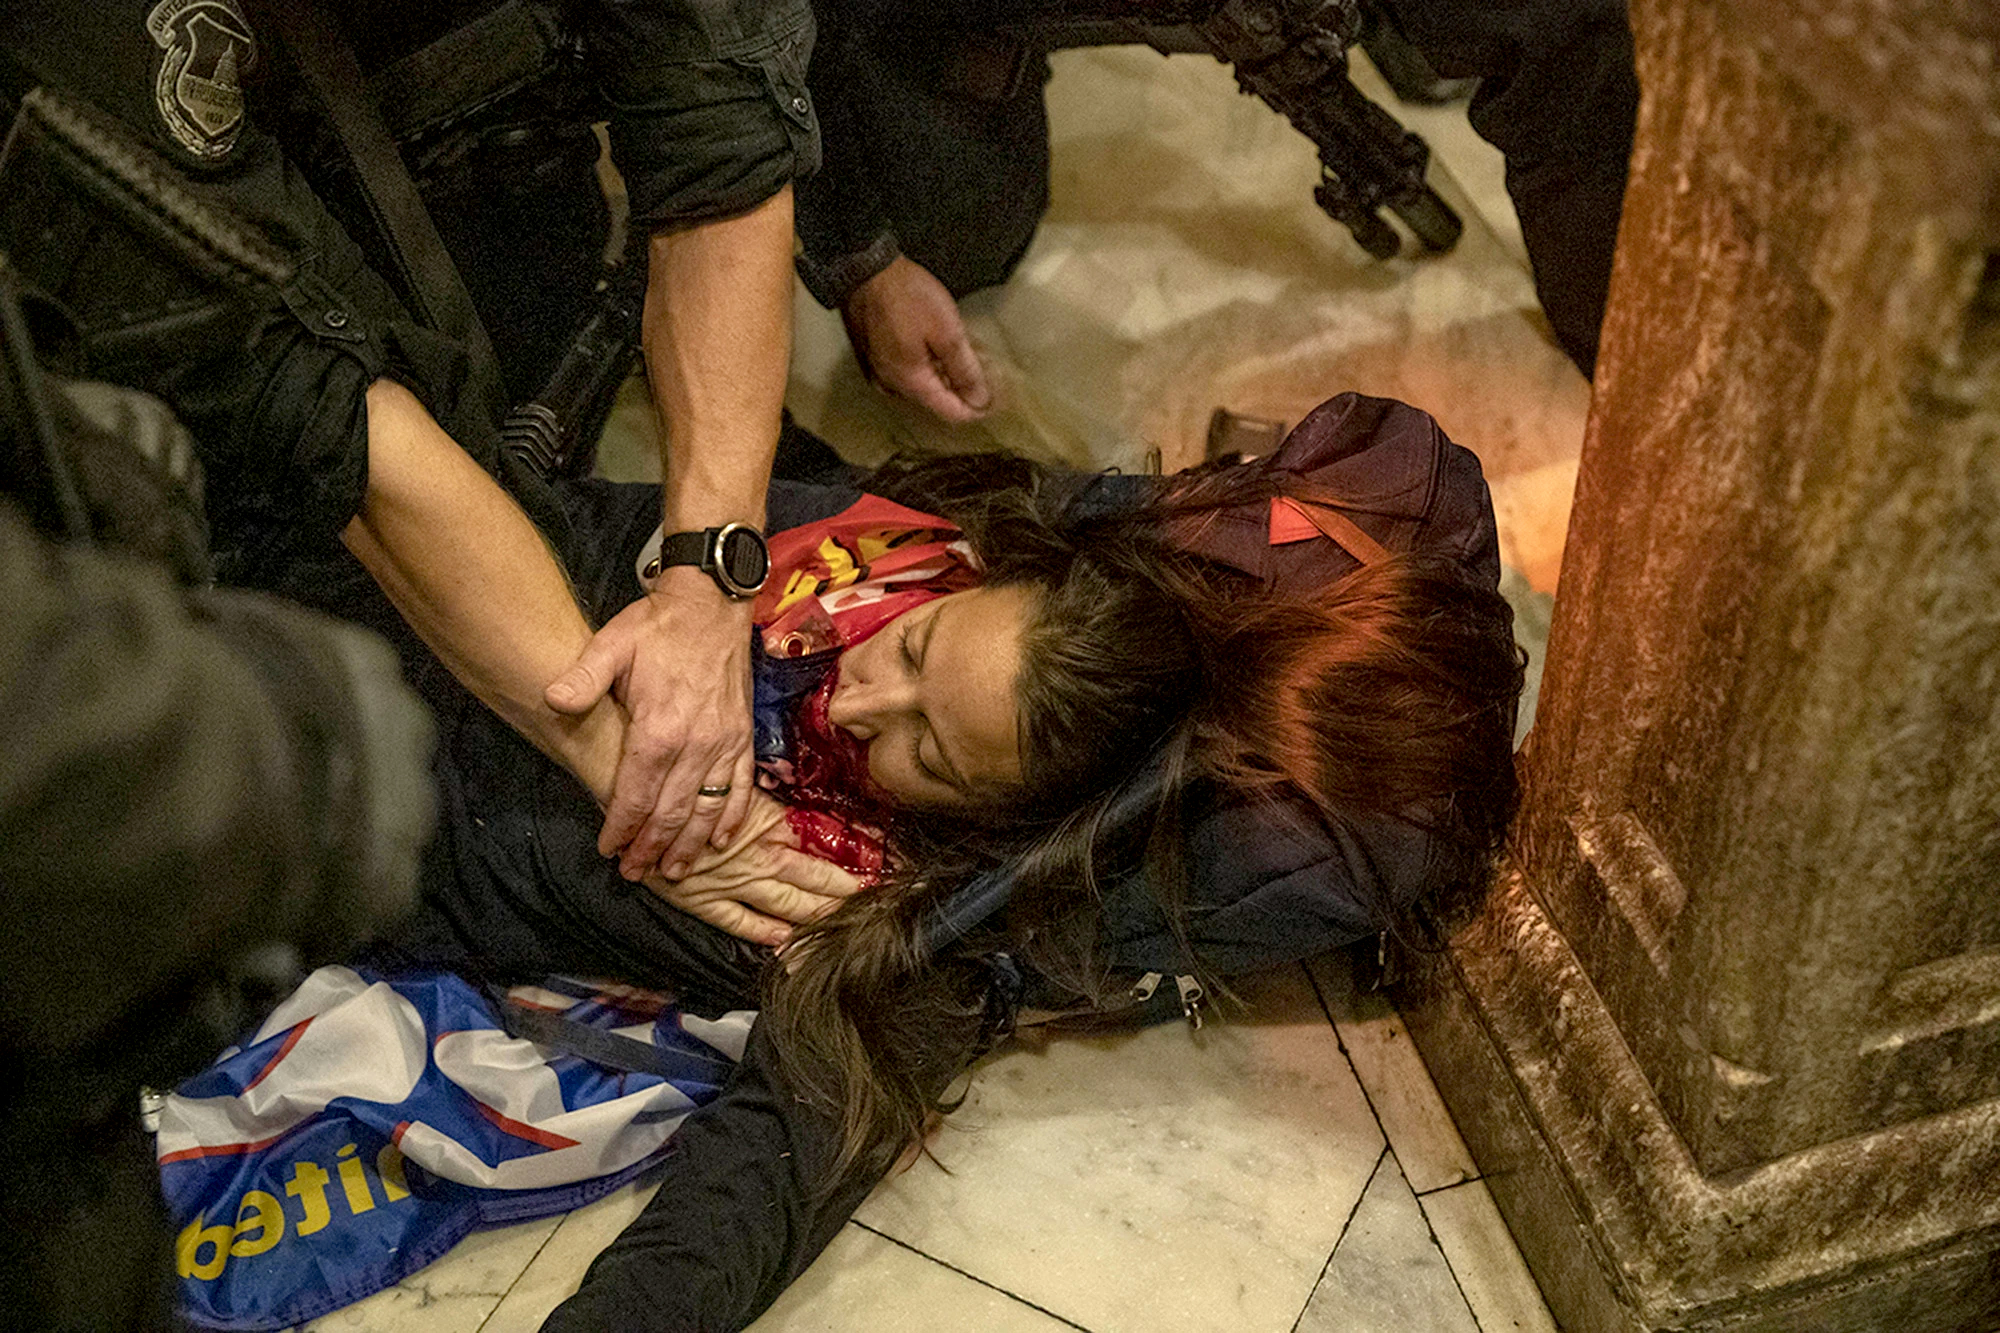 Law enforcement entities claim that the woman was shot by Capitol Police. Once shot and fell on the floor of the Capitol, police gathered around her trying to save her while calling for help, rioters all gathered around the female filming and shouting